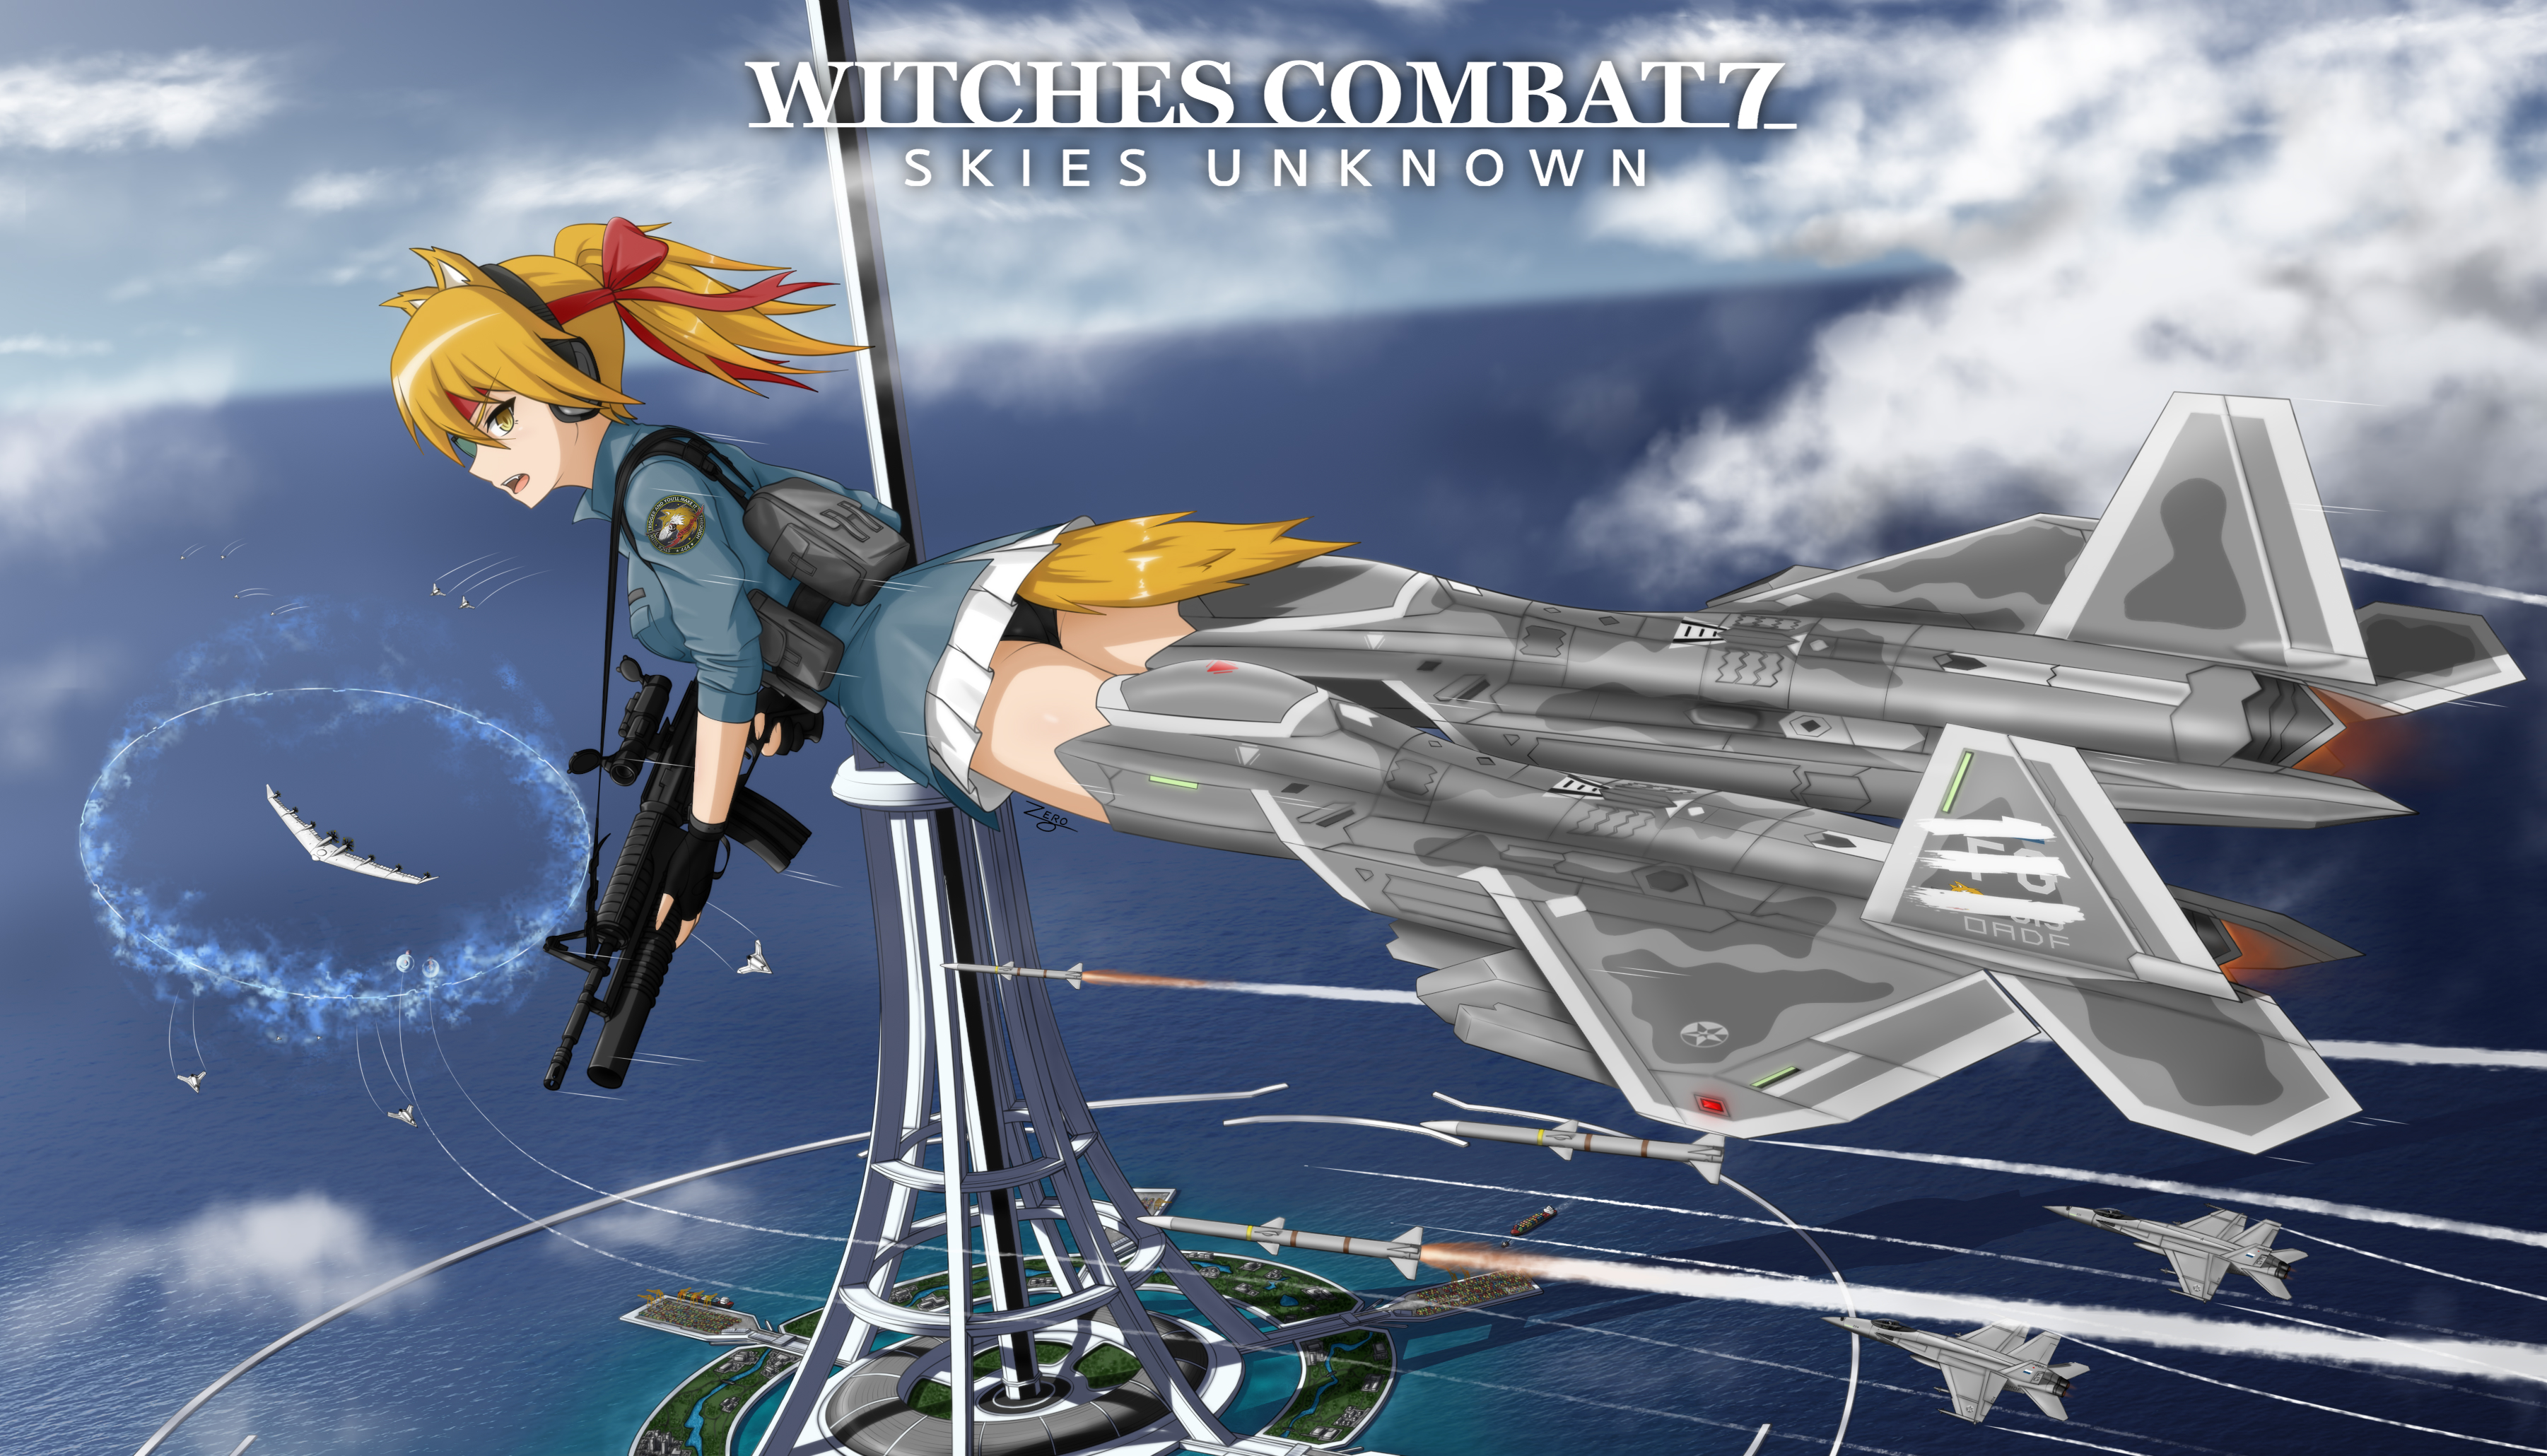 Witches Combat 7 Skies Unknown by 73RO on DeviantArt